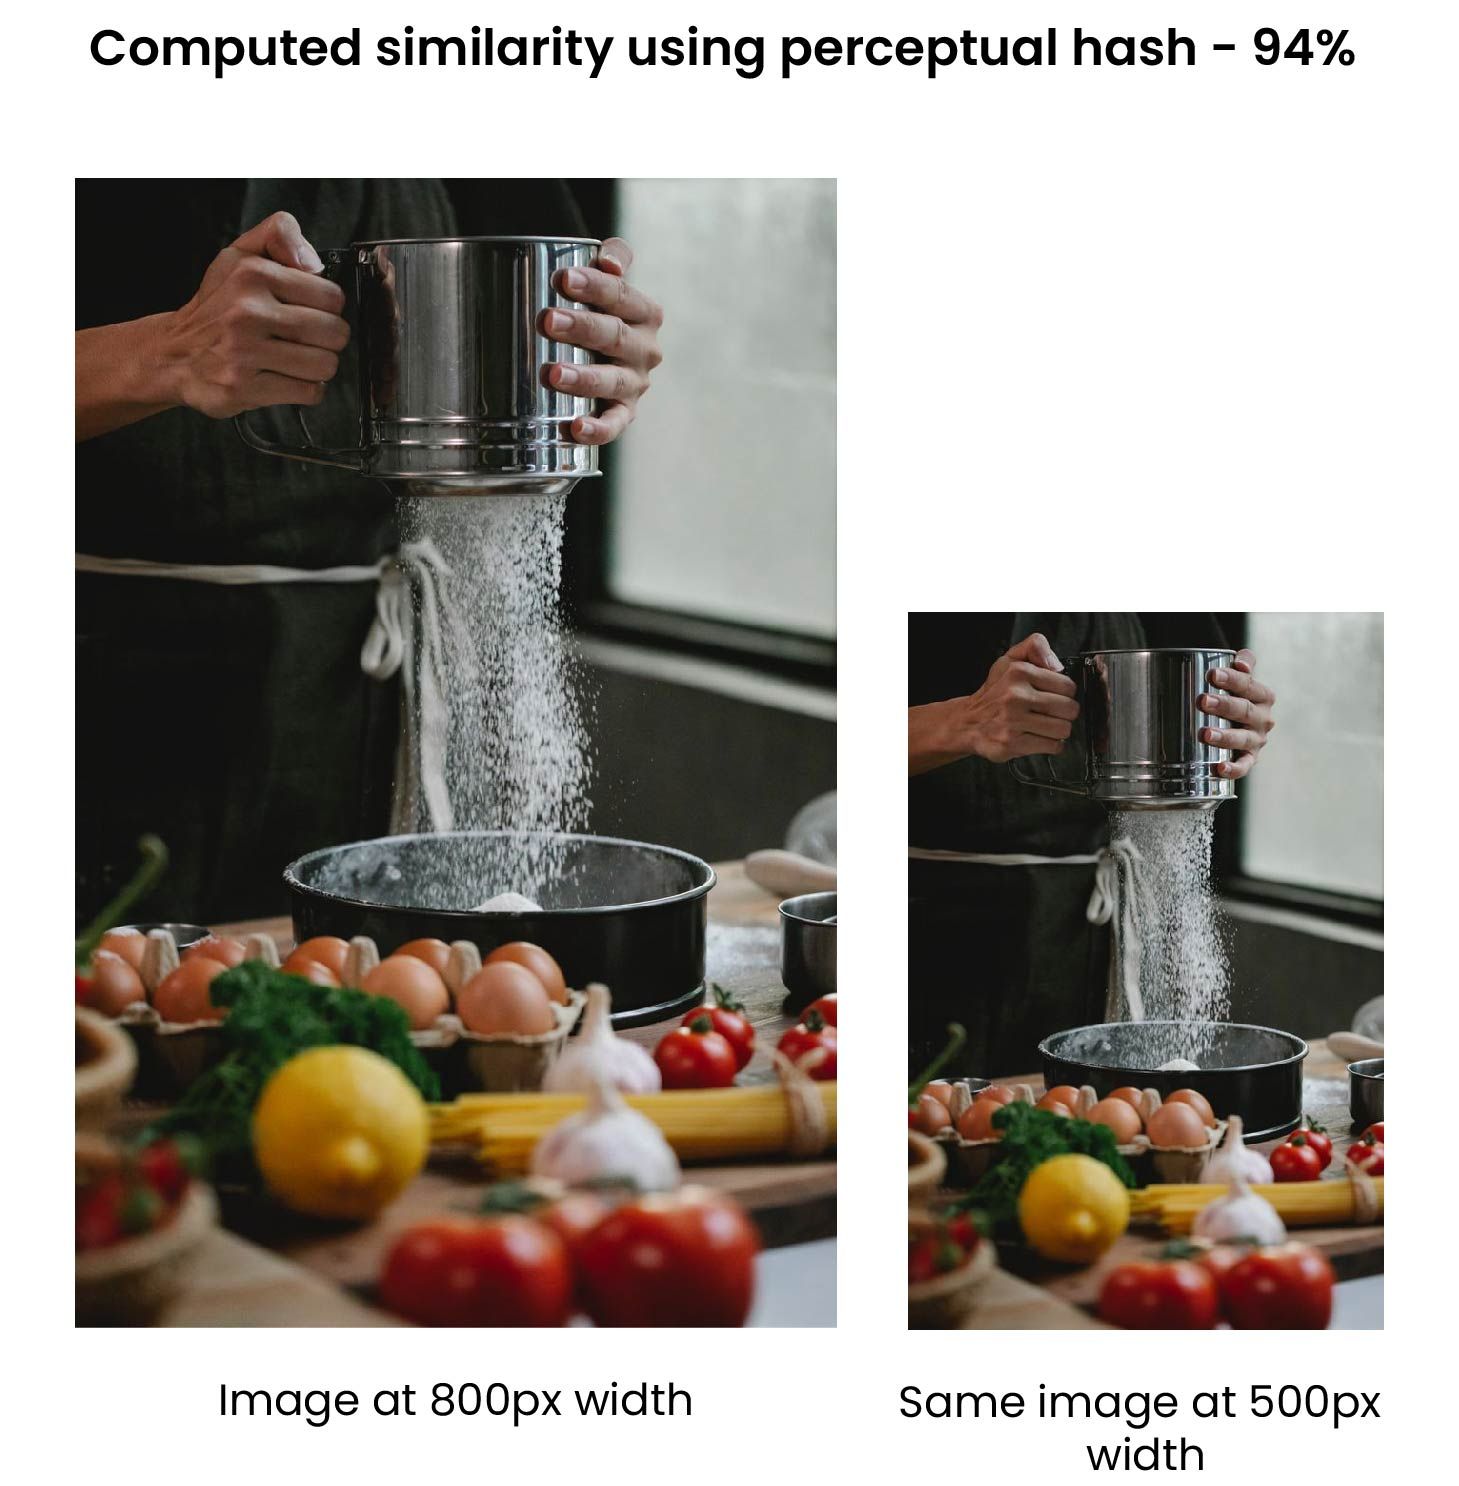 Two identical images at different dimensions are marked as 94% similar by ImageKit